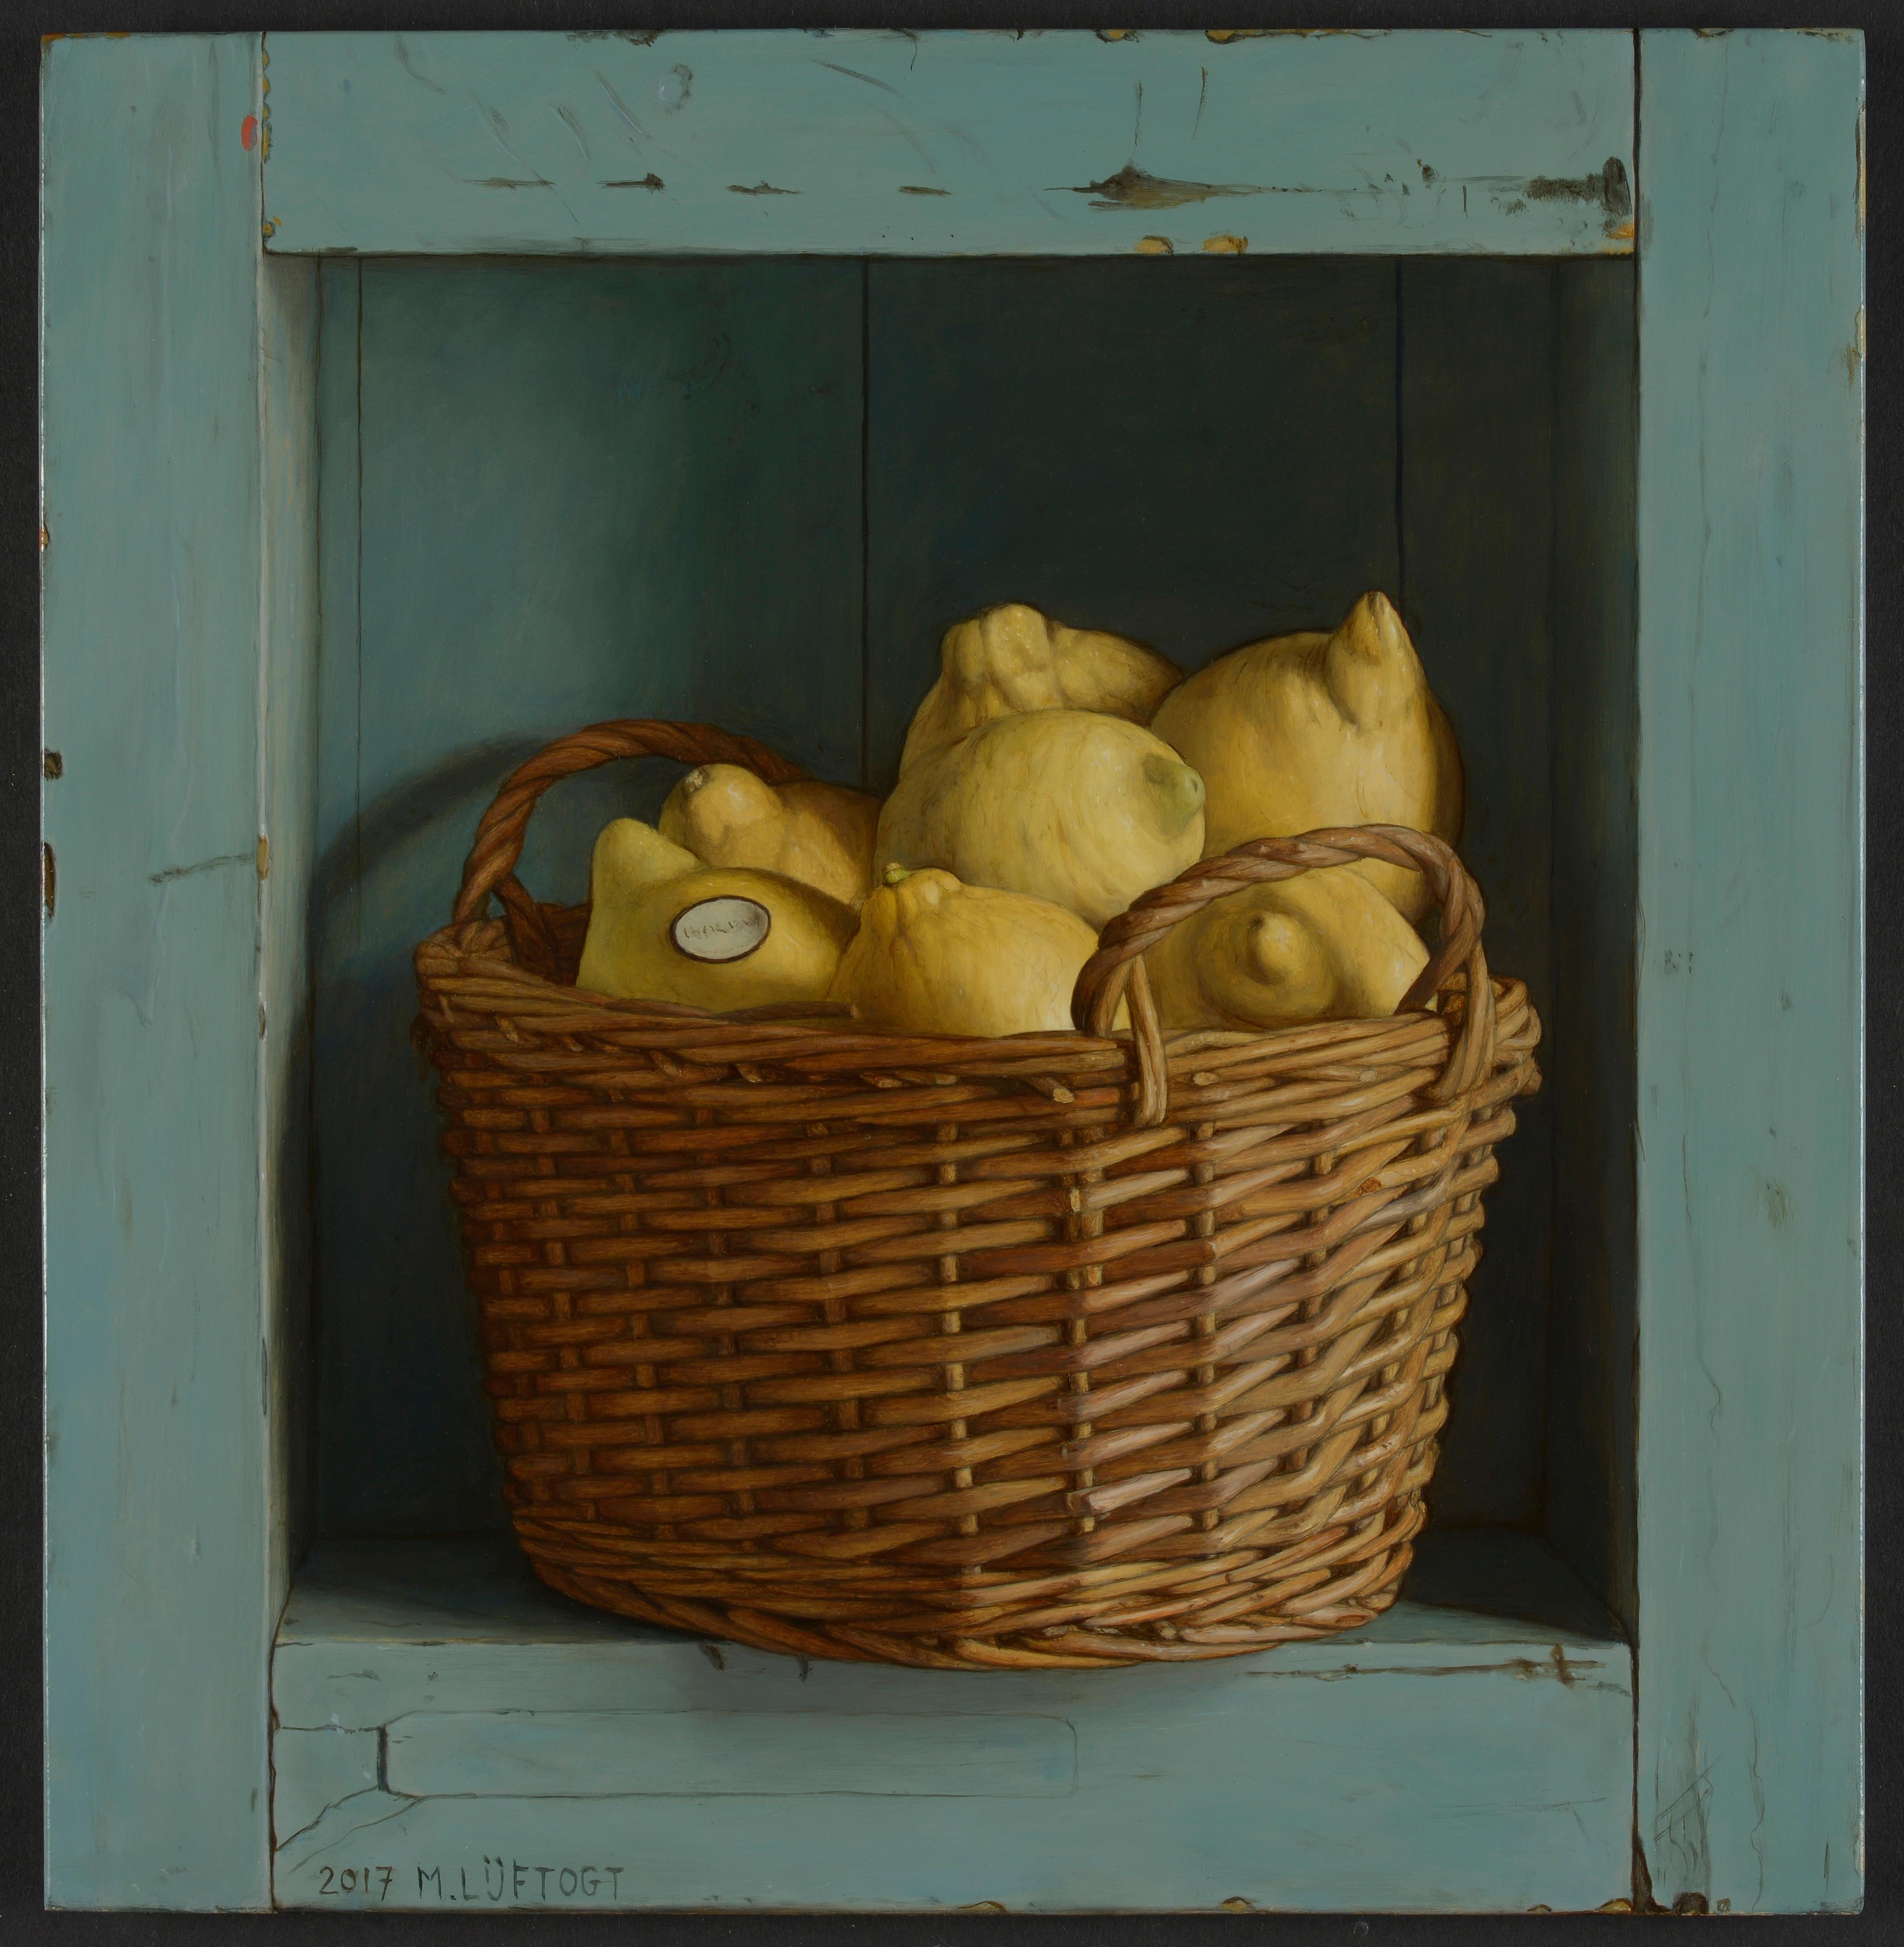 'Basket of Lemons' is a subtle, meditative  and delicate painting by the hugely talented Contemporary painter Mark Lijftogt. 

Lijftogt was born in Amsterdam and at the age of 19 decided to pursue his creative path. He would spend every day for